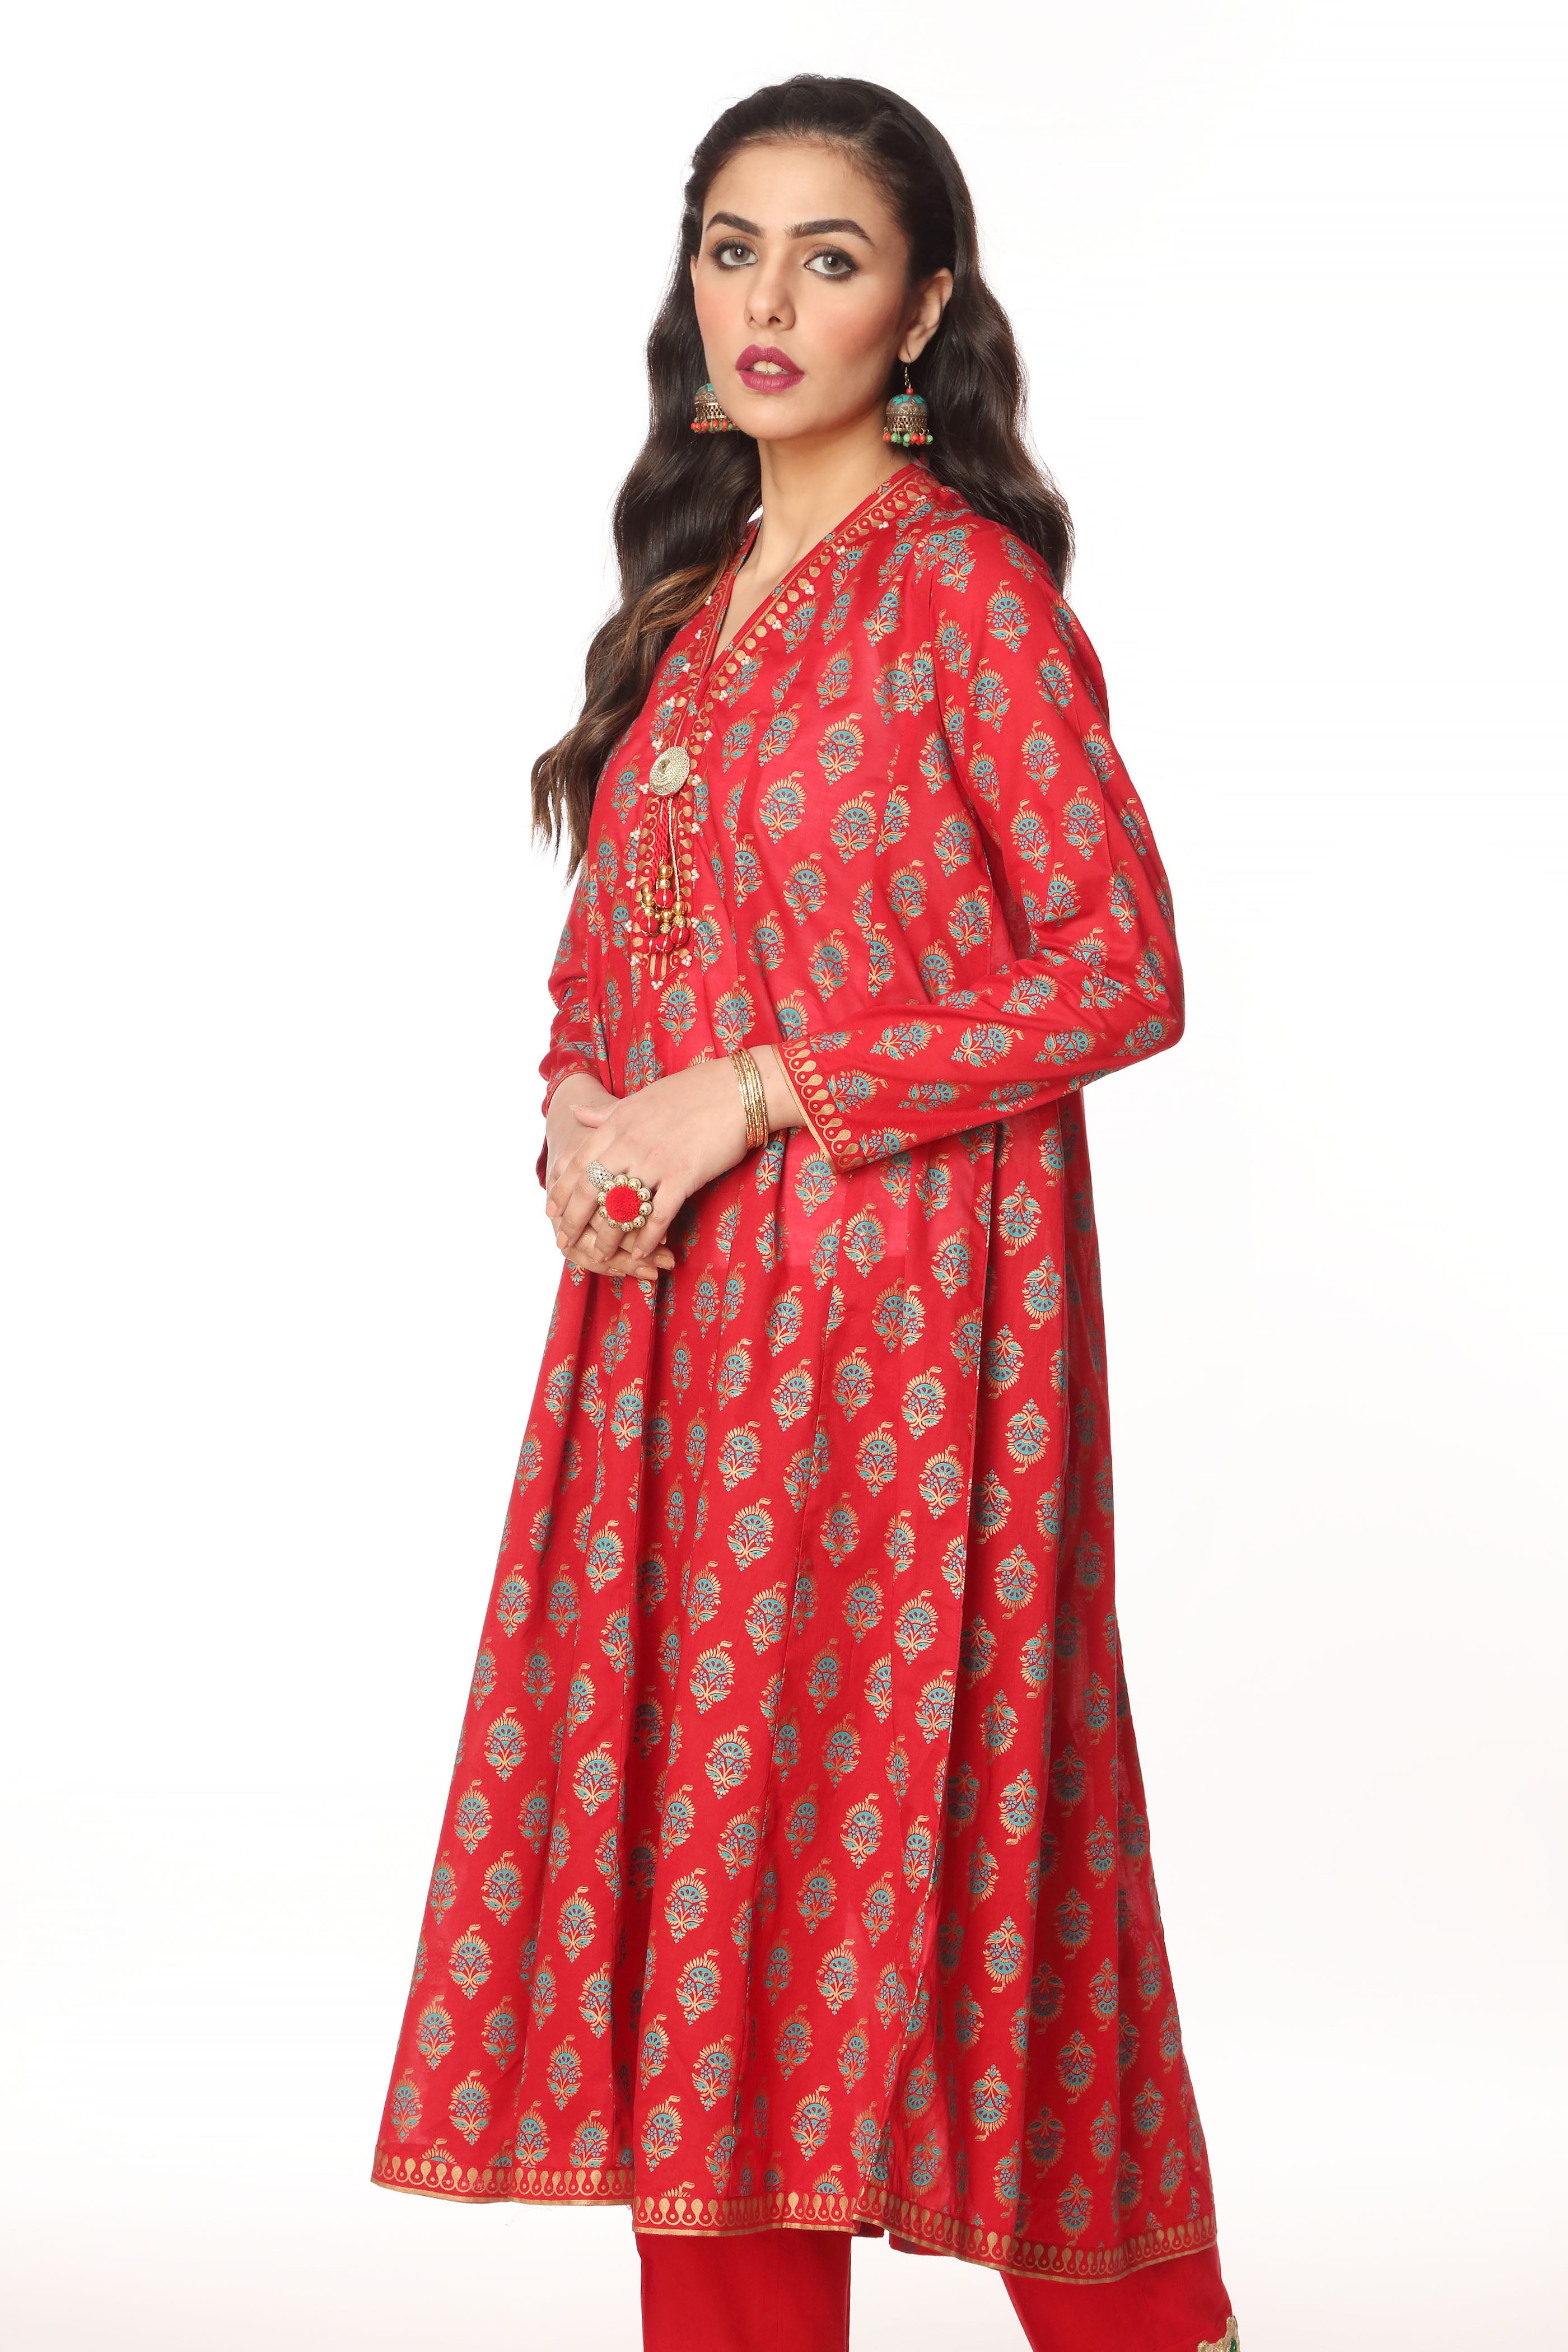 Peacock Frock in Red coloured Printed Lawn fabric 2